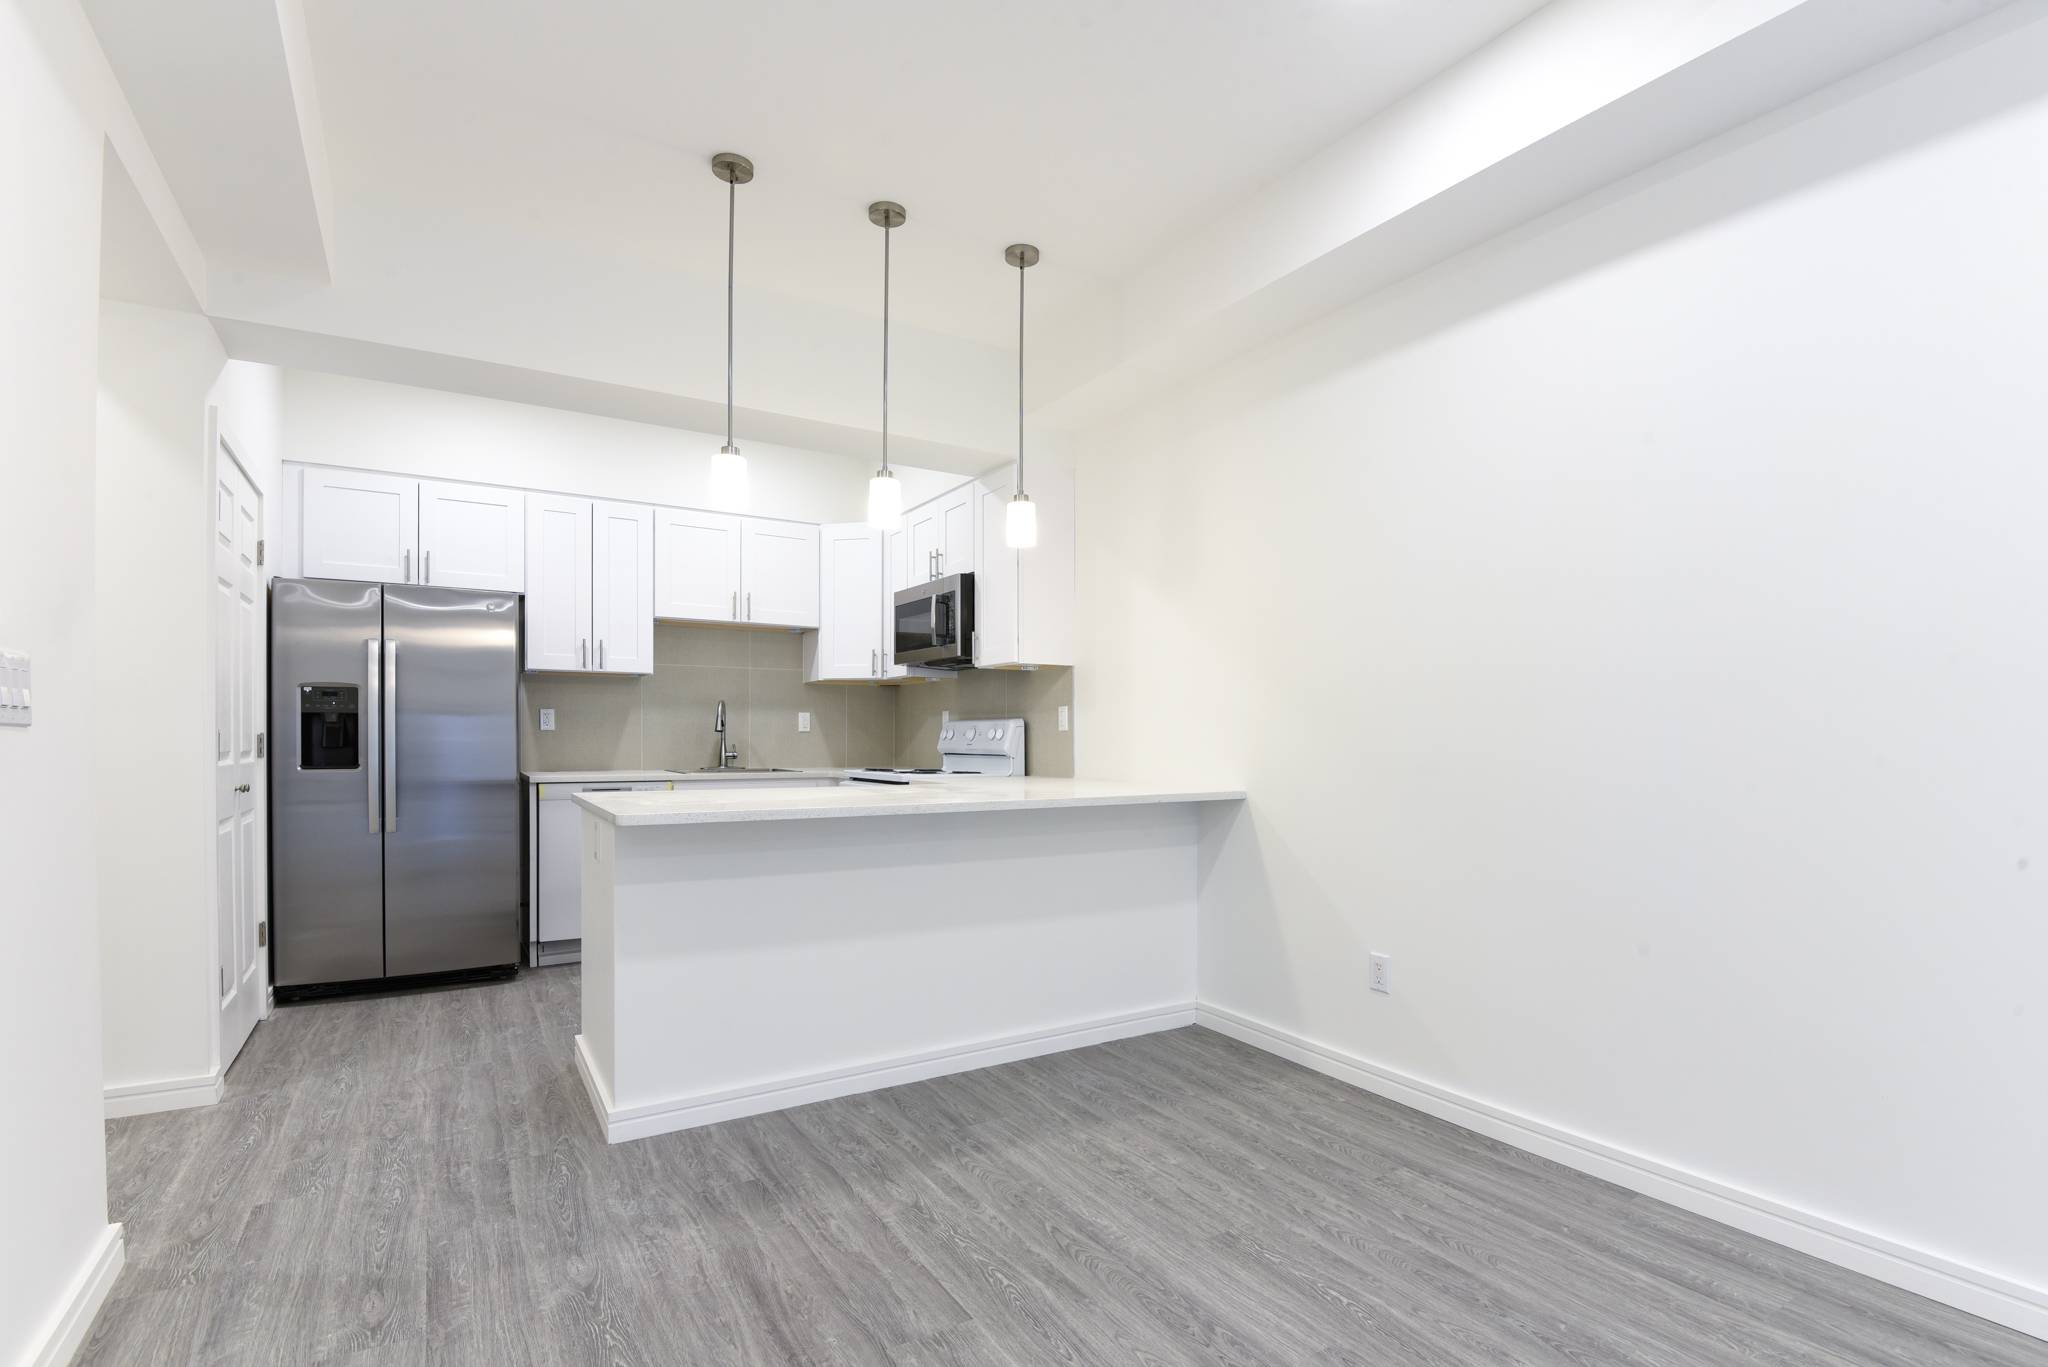 Newly constructed 3 bed 2 bath apartment in the heart of Greenpoint.